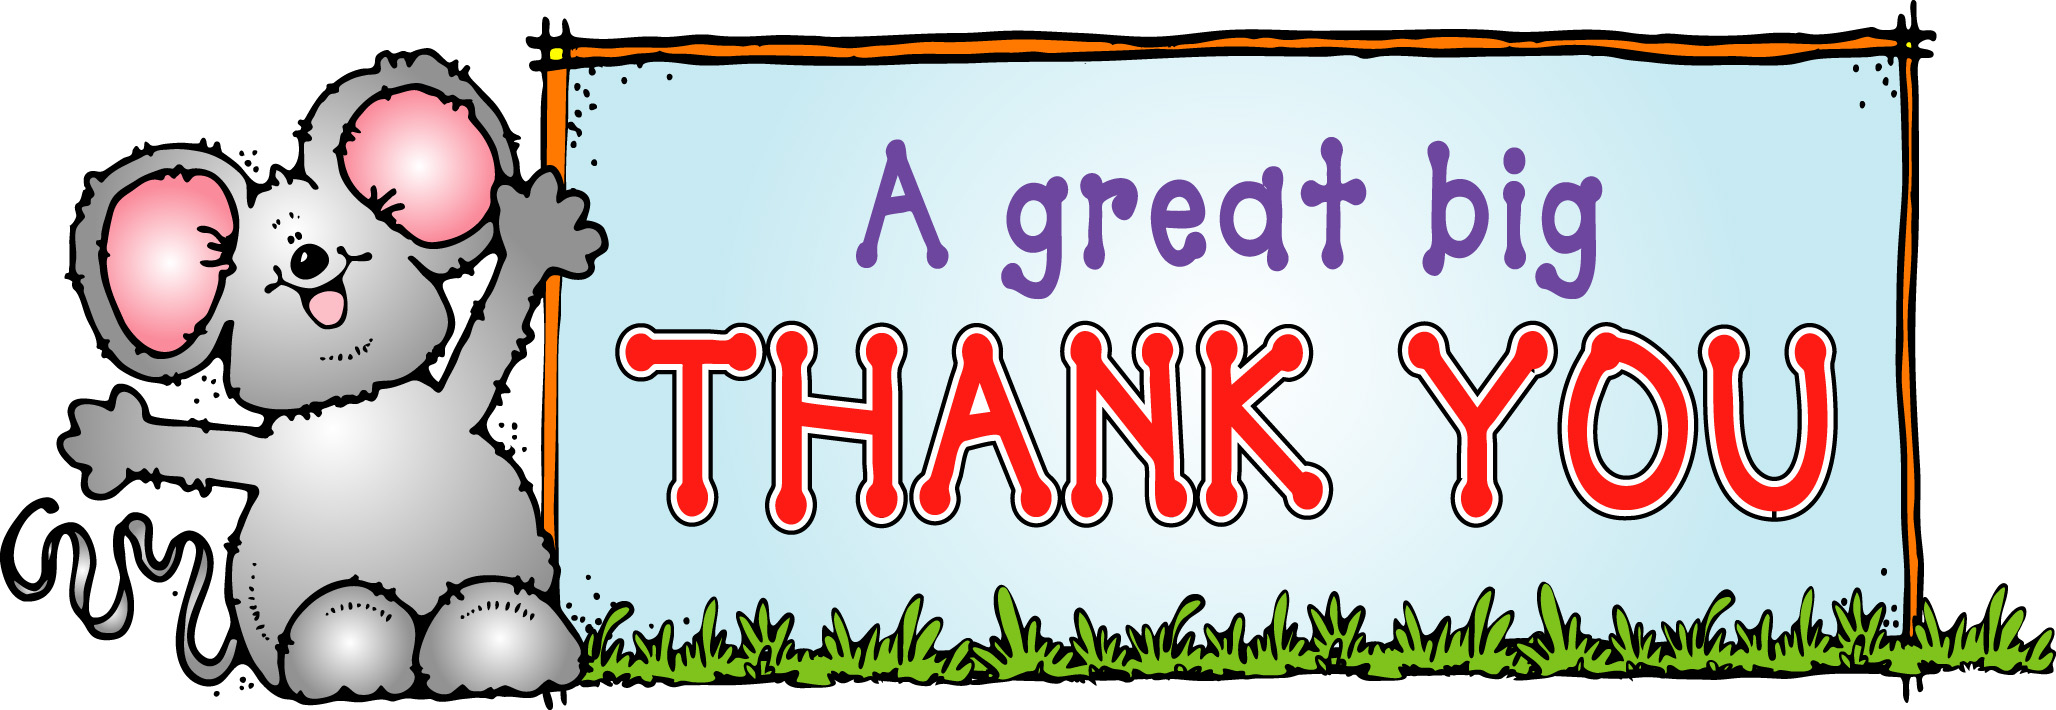 free thank you clipart images - photo #46